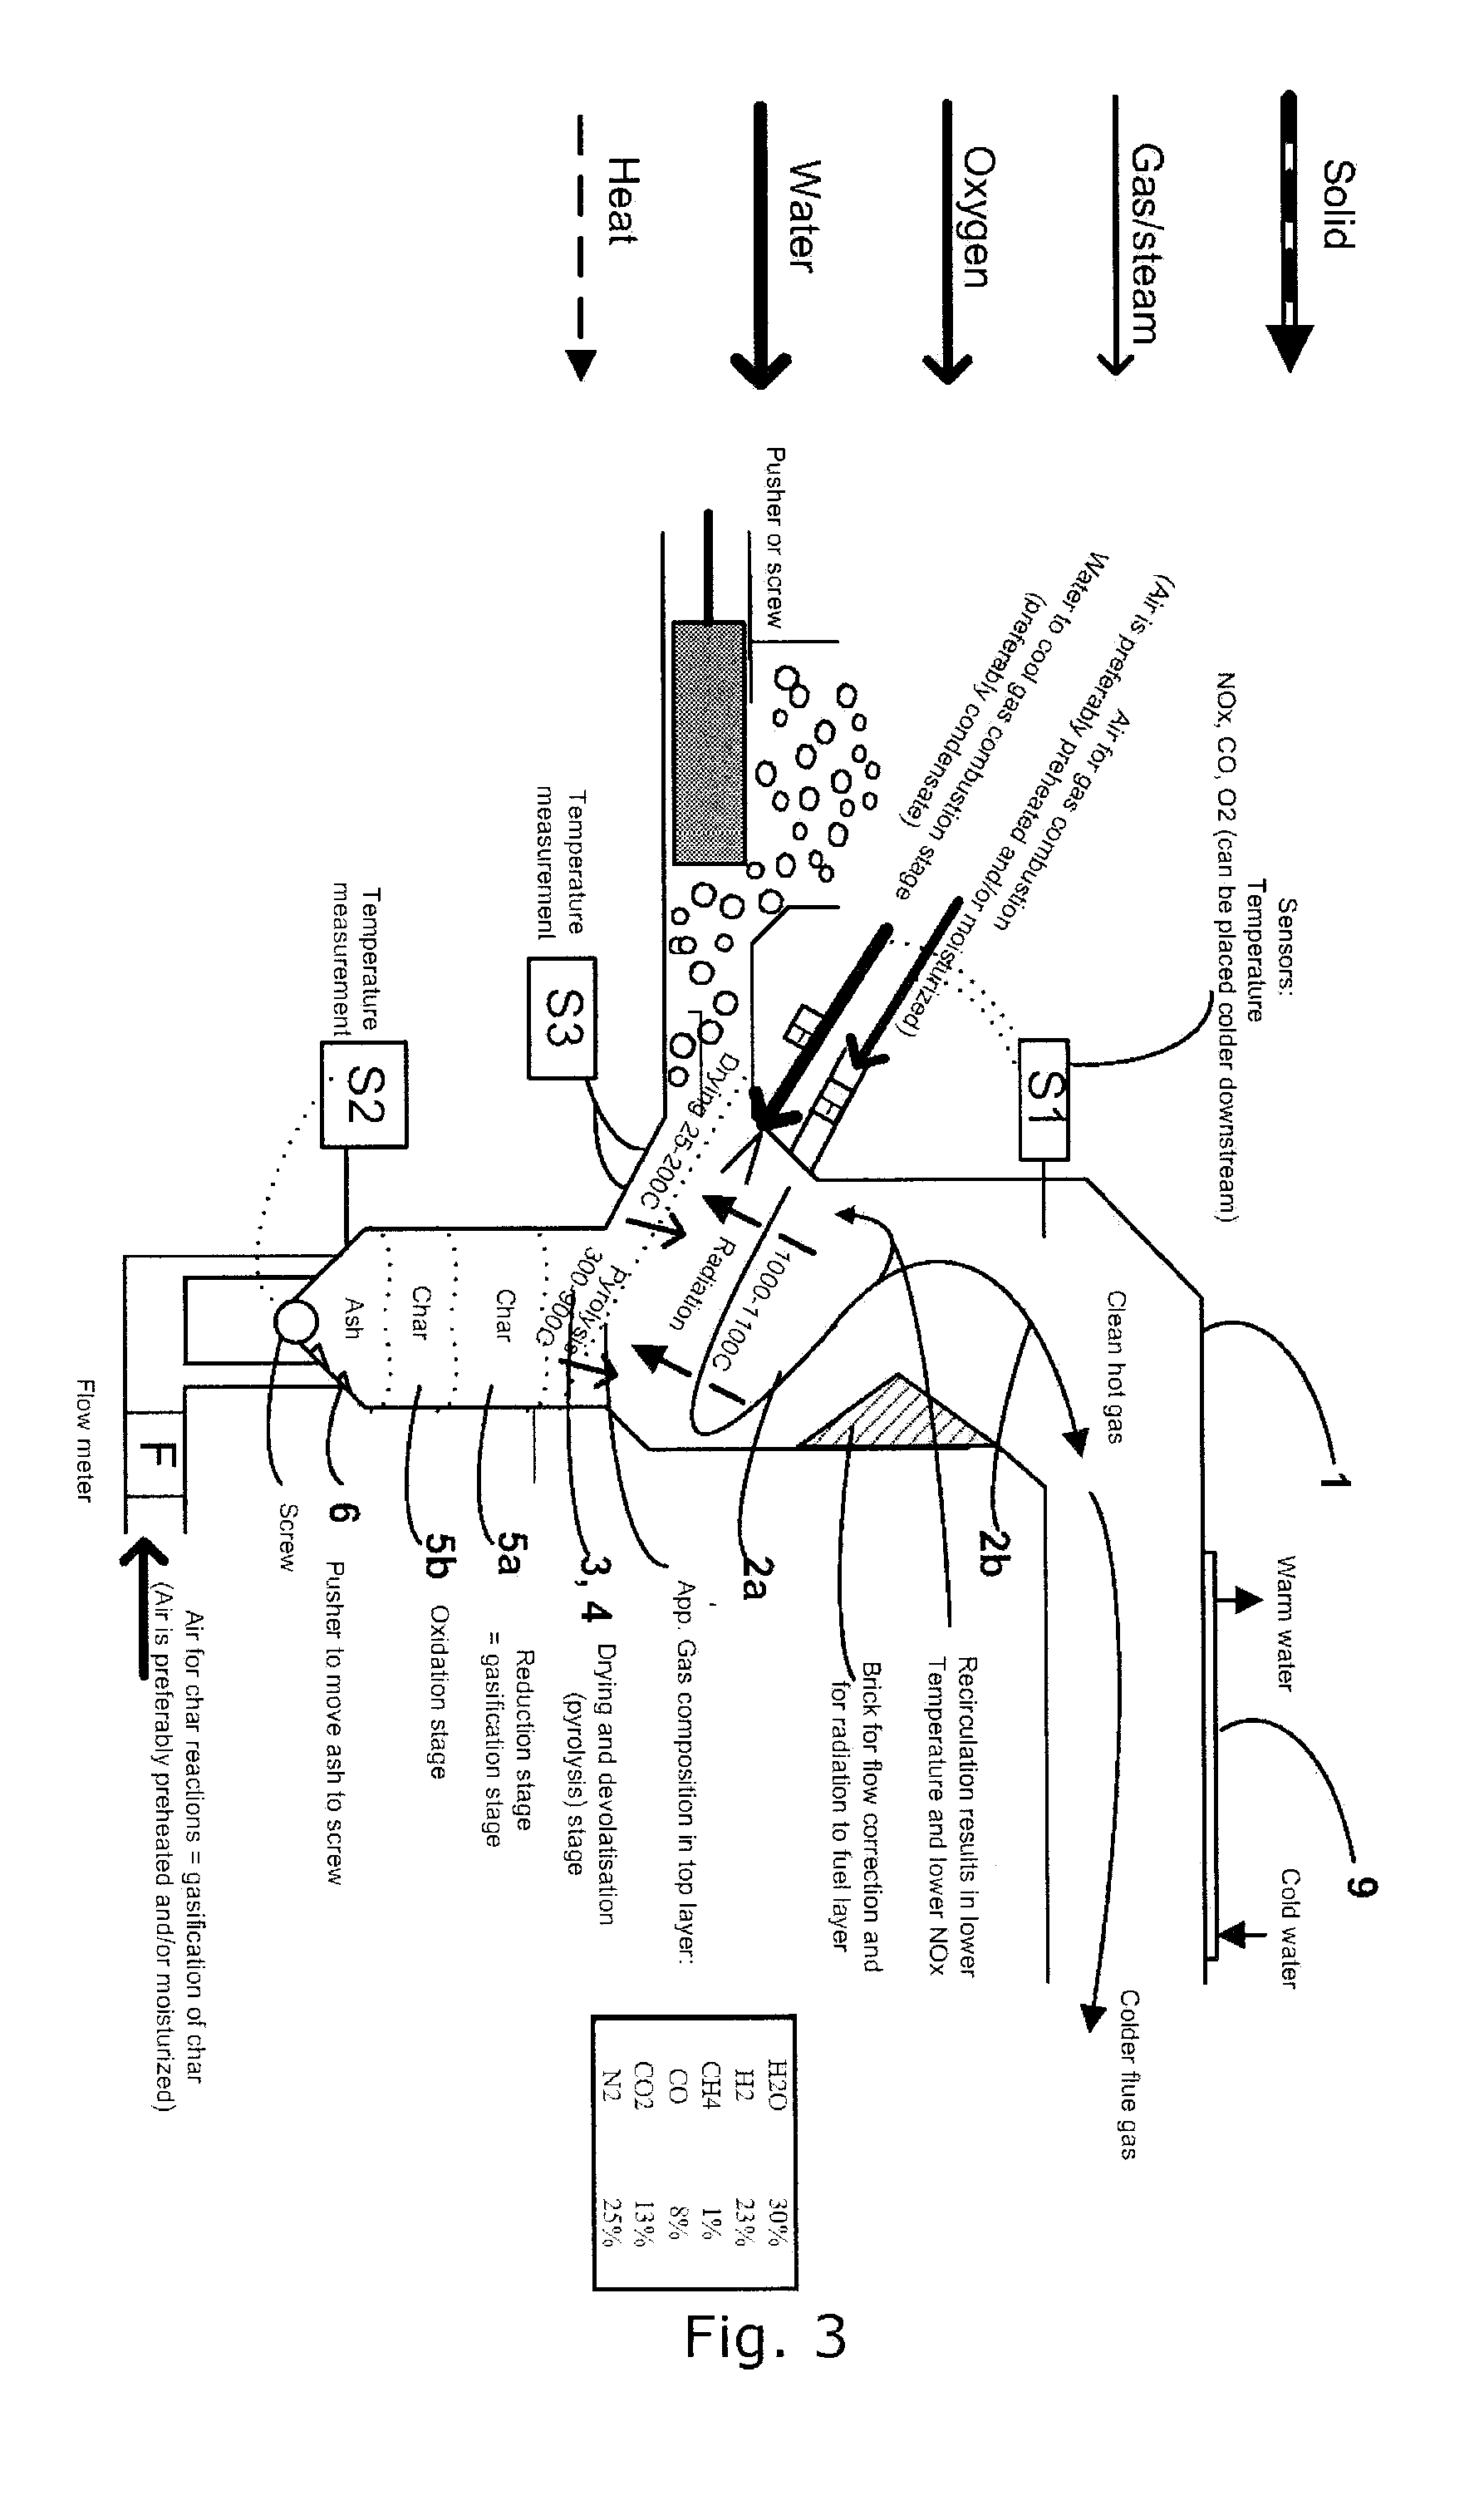 Method and system for production of a clean hot gas based on solid fuels